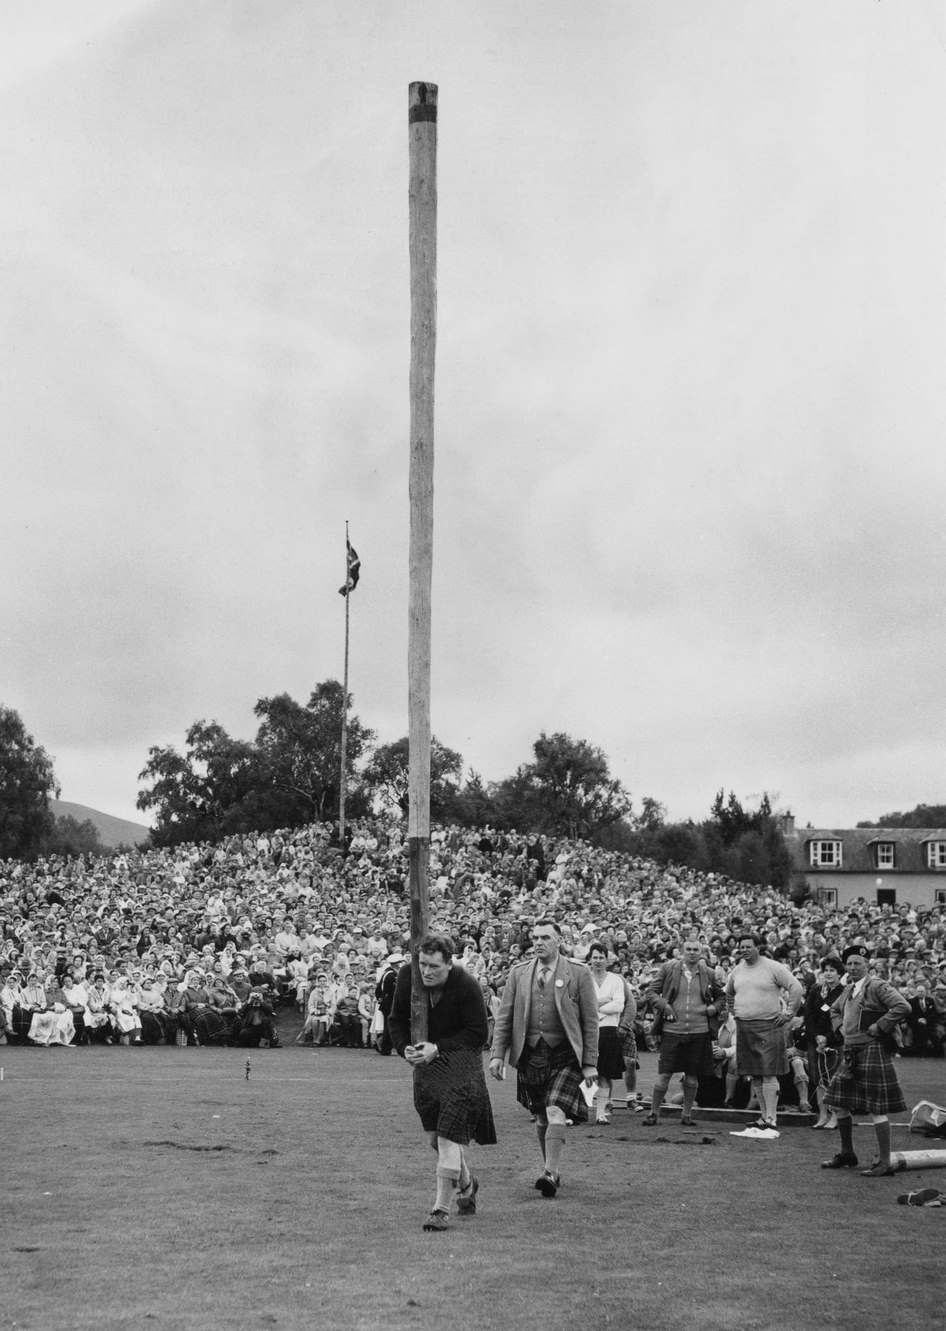 British Highland Games athlete Bill Anderson watched by officials as he competes in the caber toss event of the Braemar Gathering in Braemar, Aberdeenshire, Scotland, 9th September 1961.